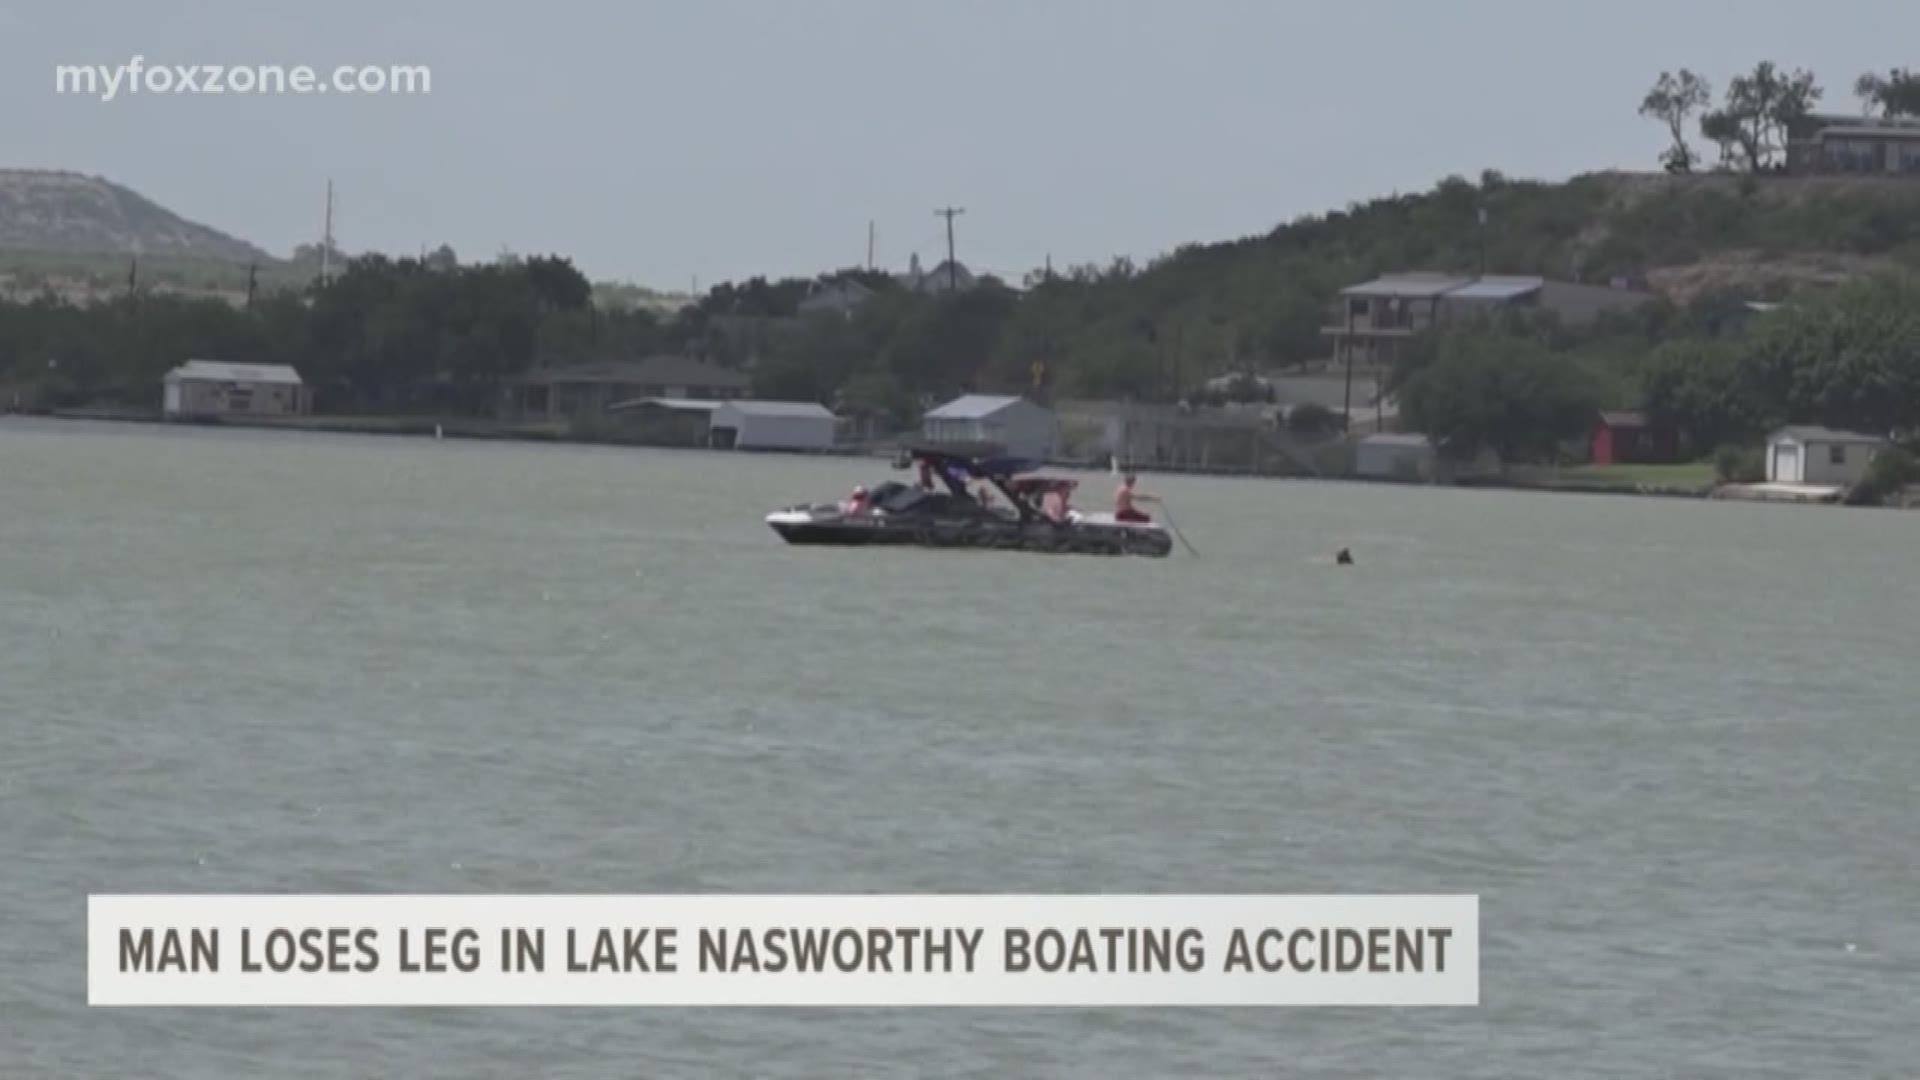 One man is recovering after a dreadful accident that severed his leg on lake Nasworthy yesterday. Our Brenda Matute has the details.